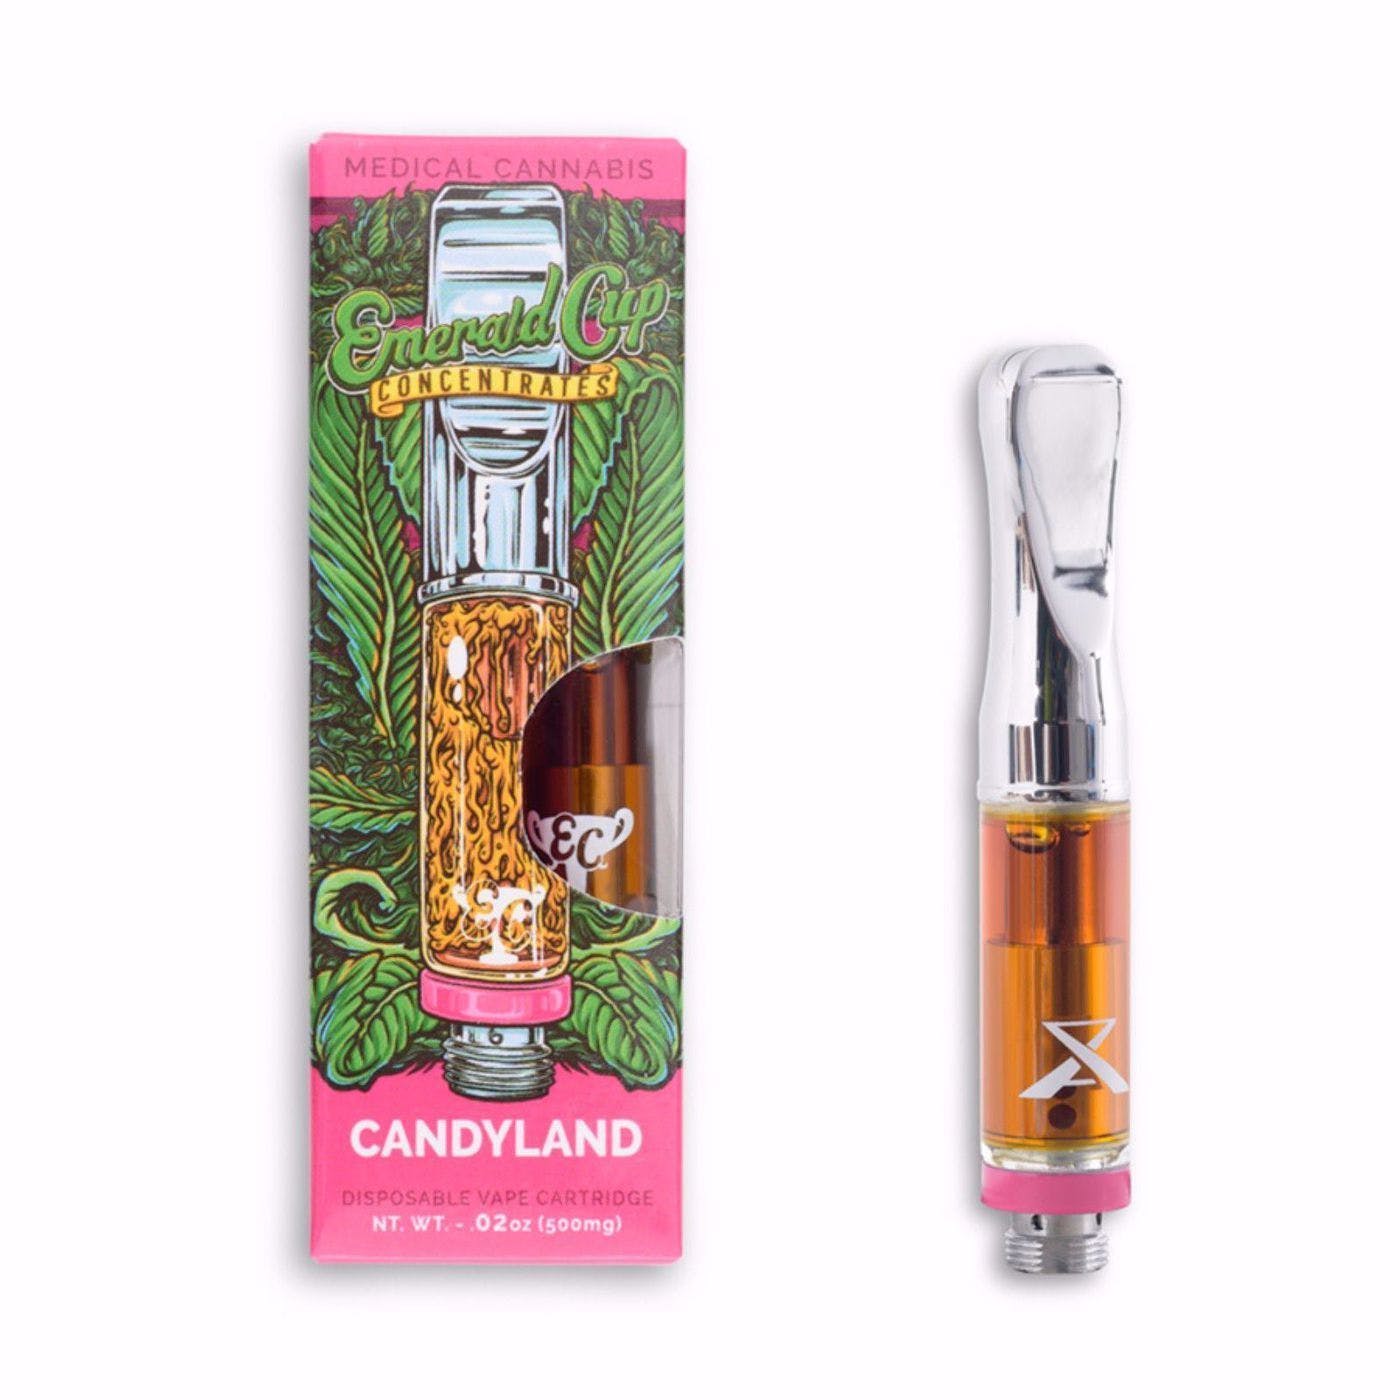 concentrate-candyland-vape-cartridge-500mg